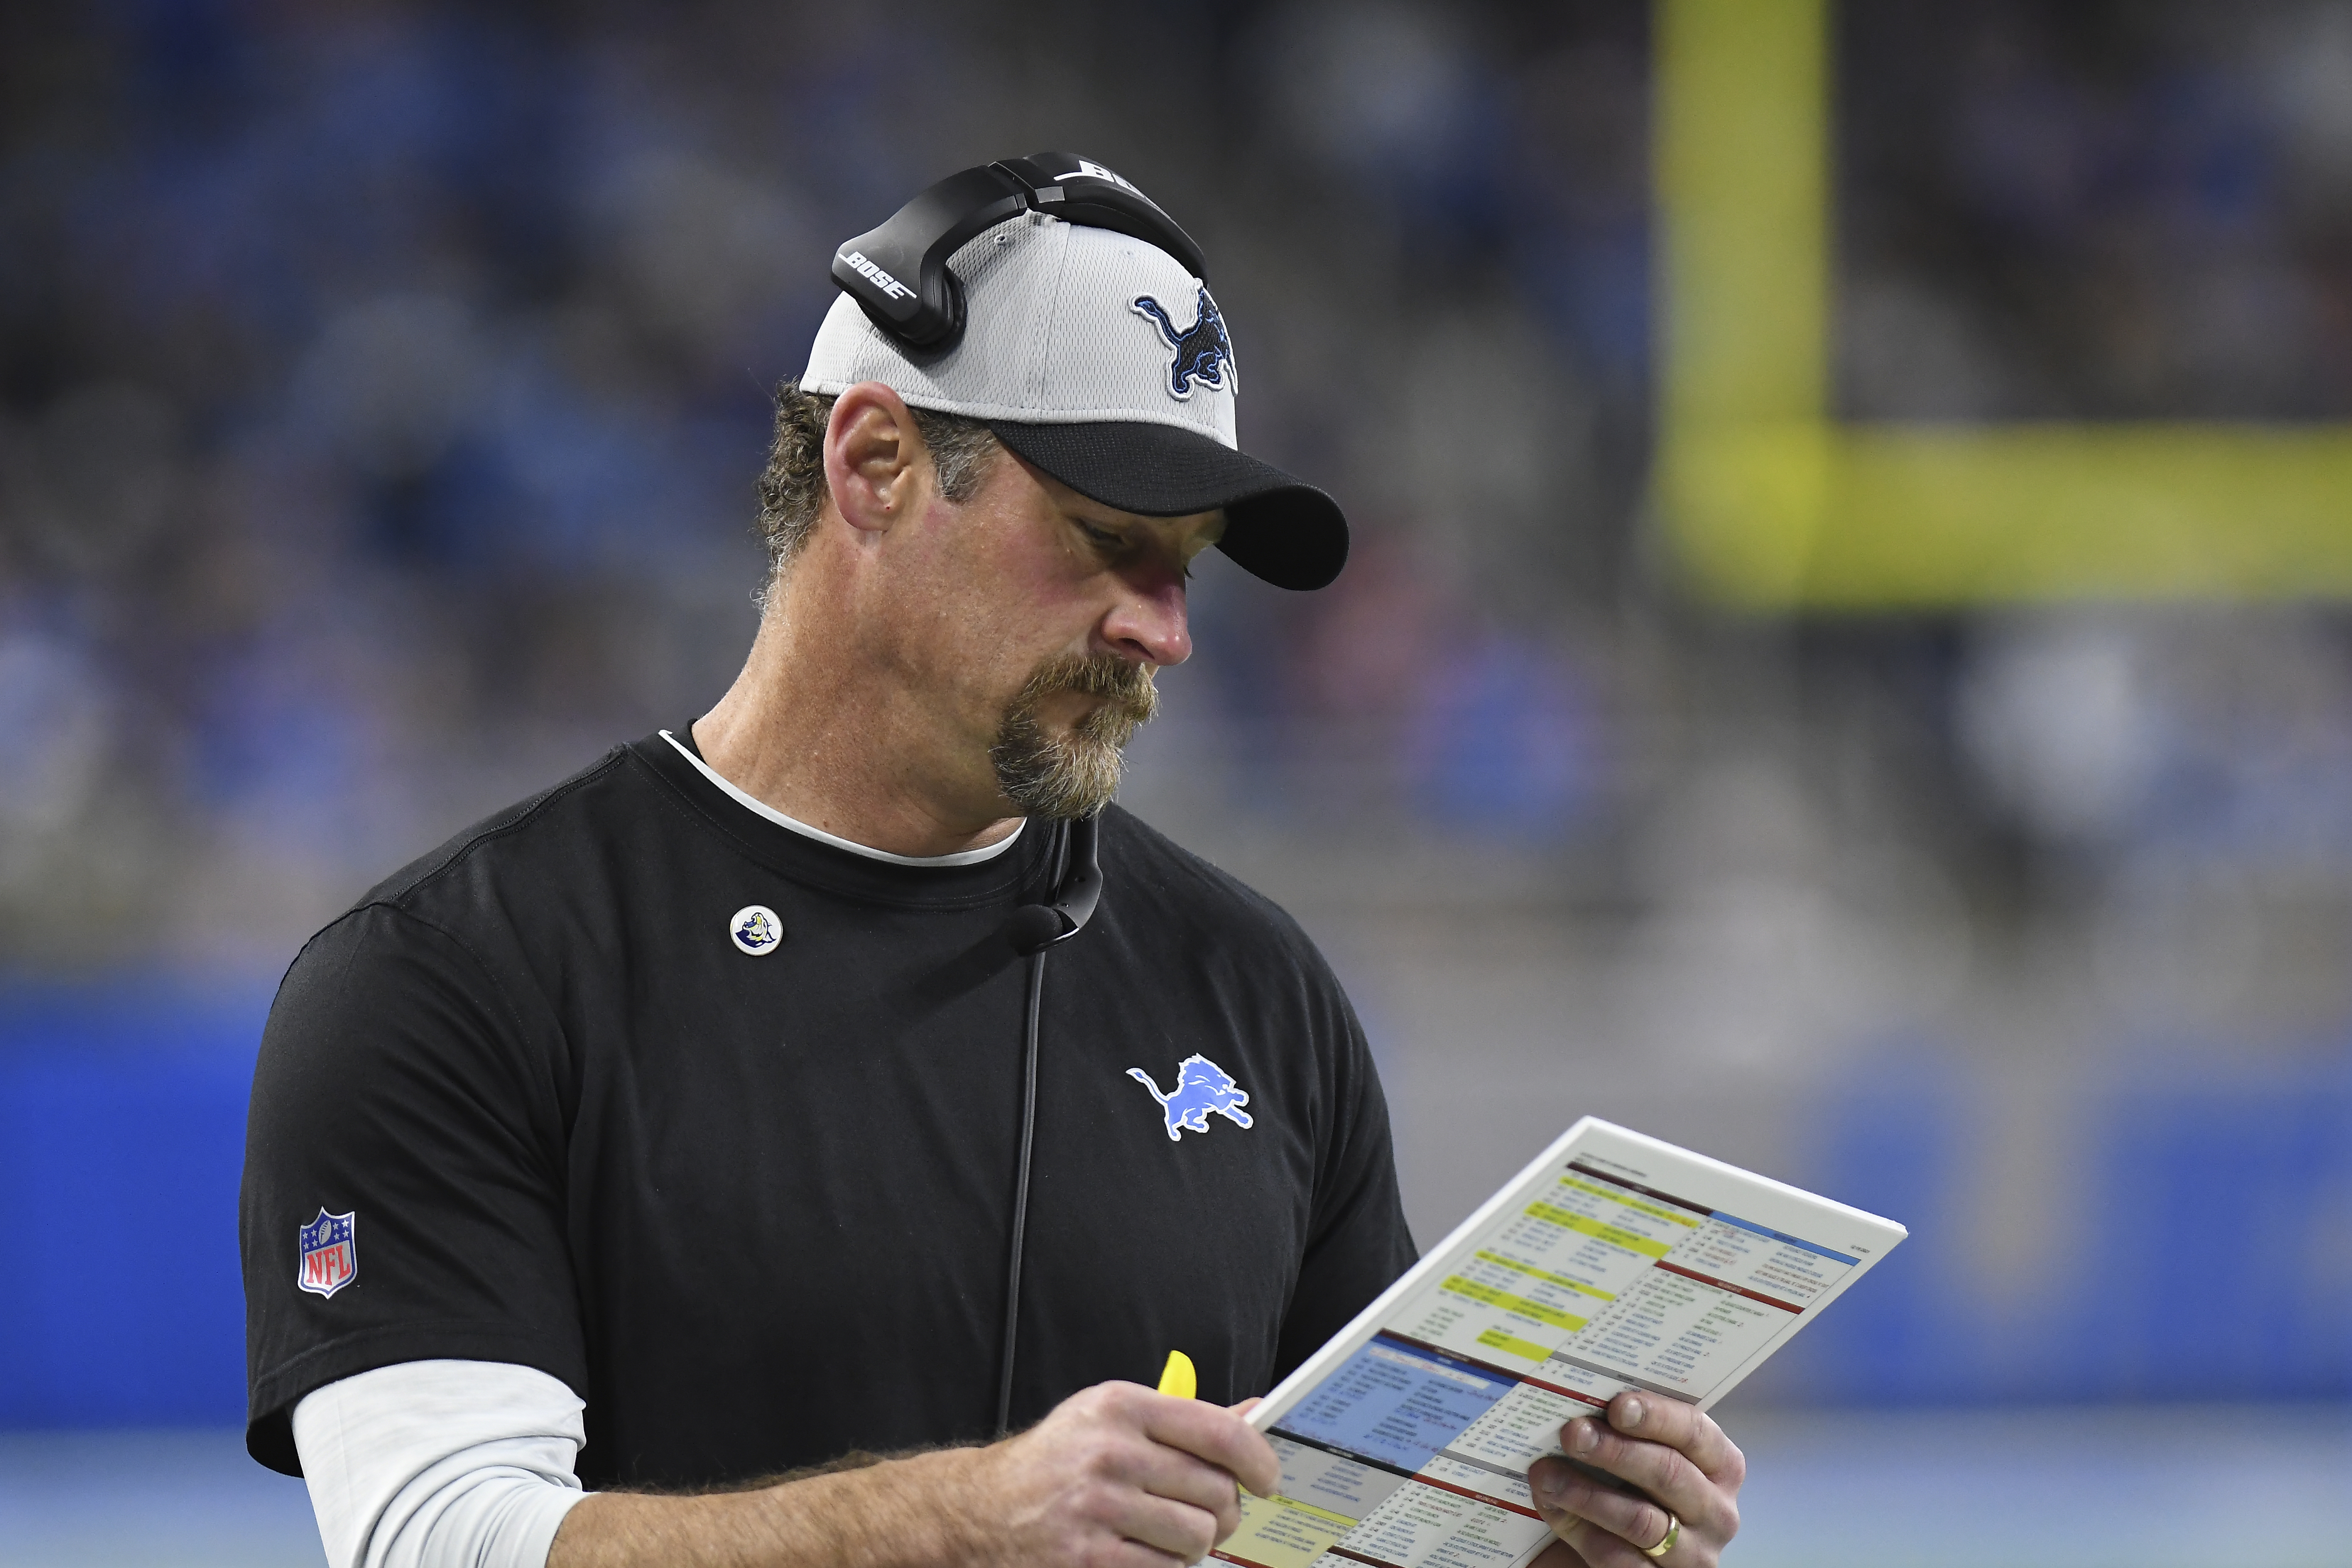 Lions appear to have bright future under coach Dan Campbell